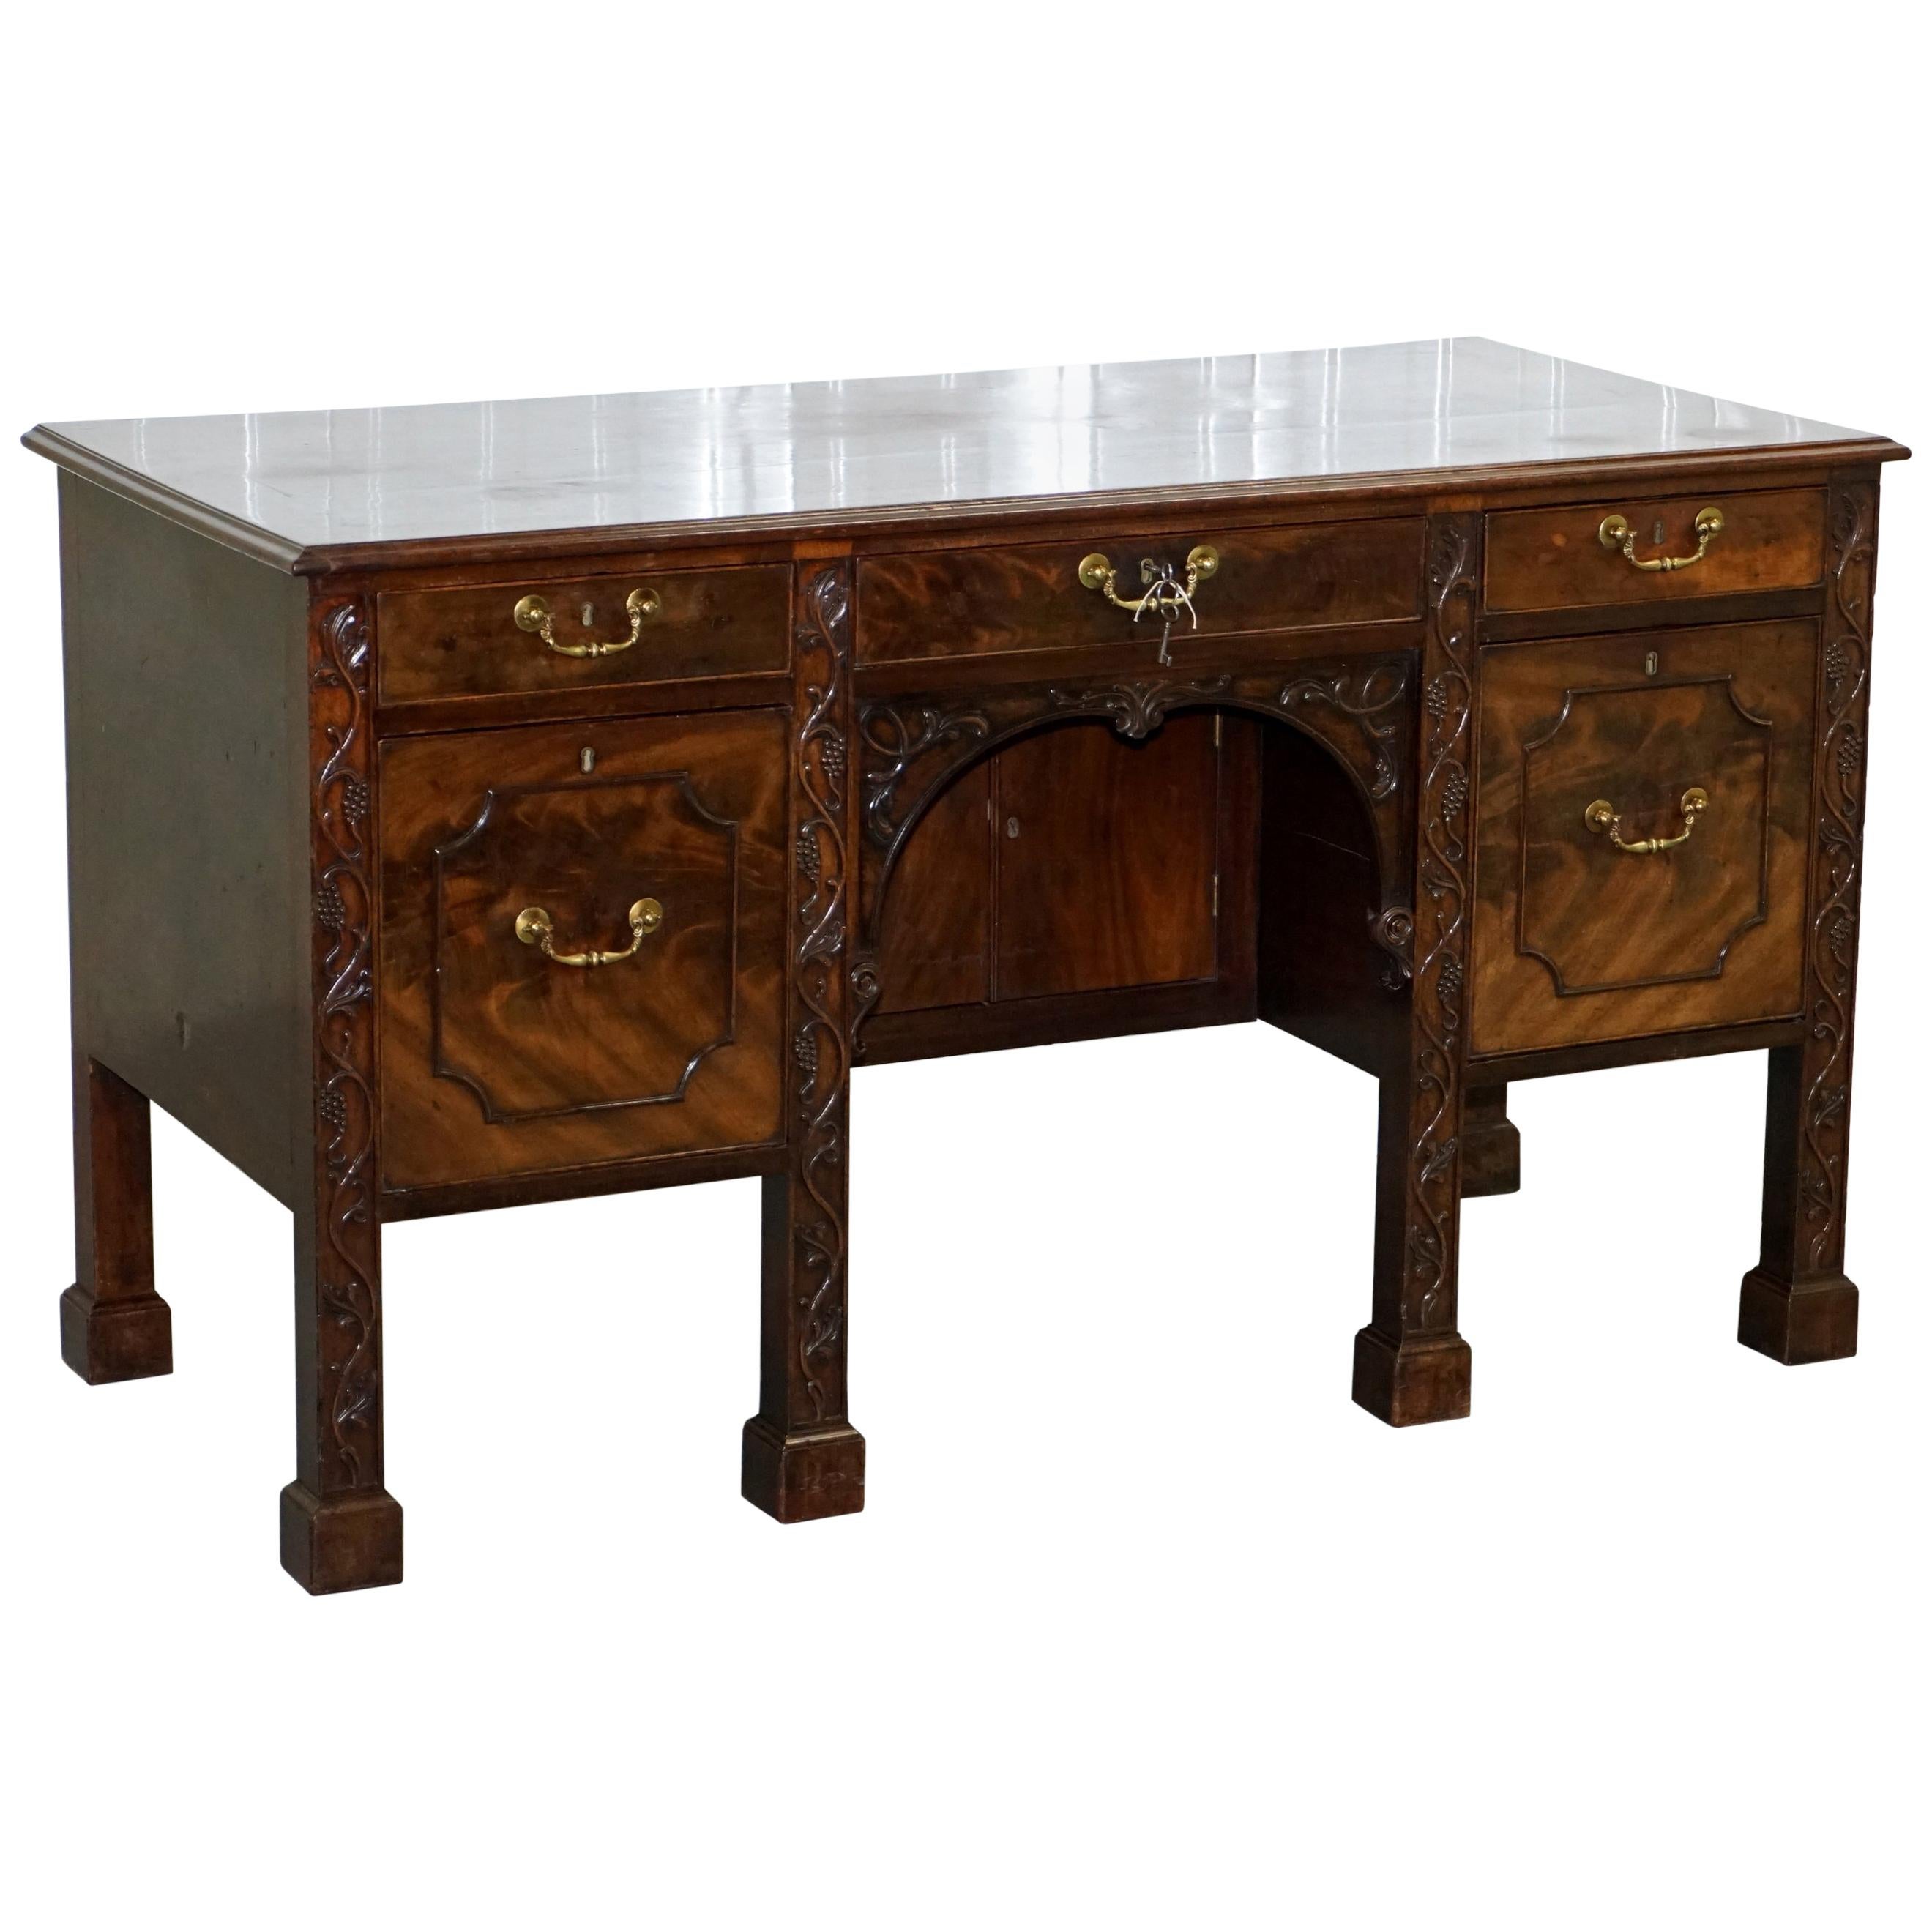 Viscountess Boyd's Ince Castle Rare George III Hardwood Sideboard Chippendale For Sale